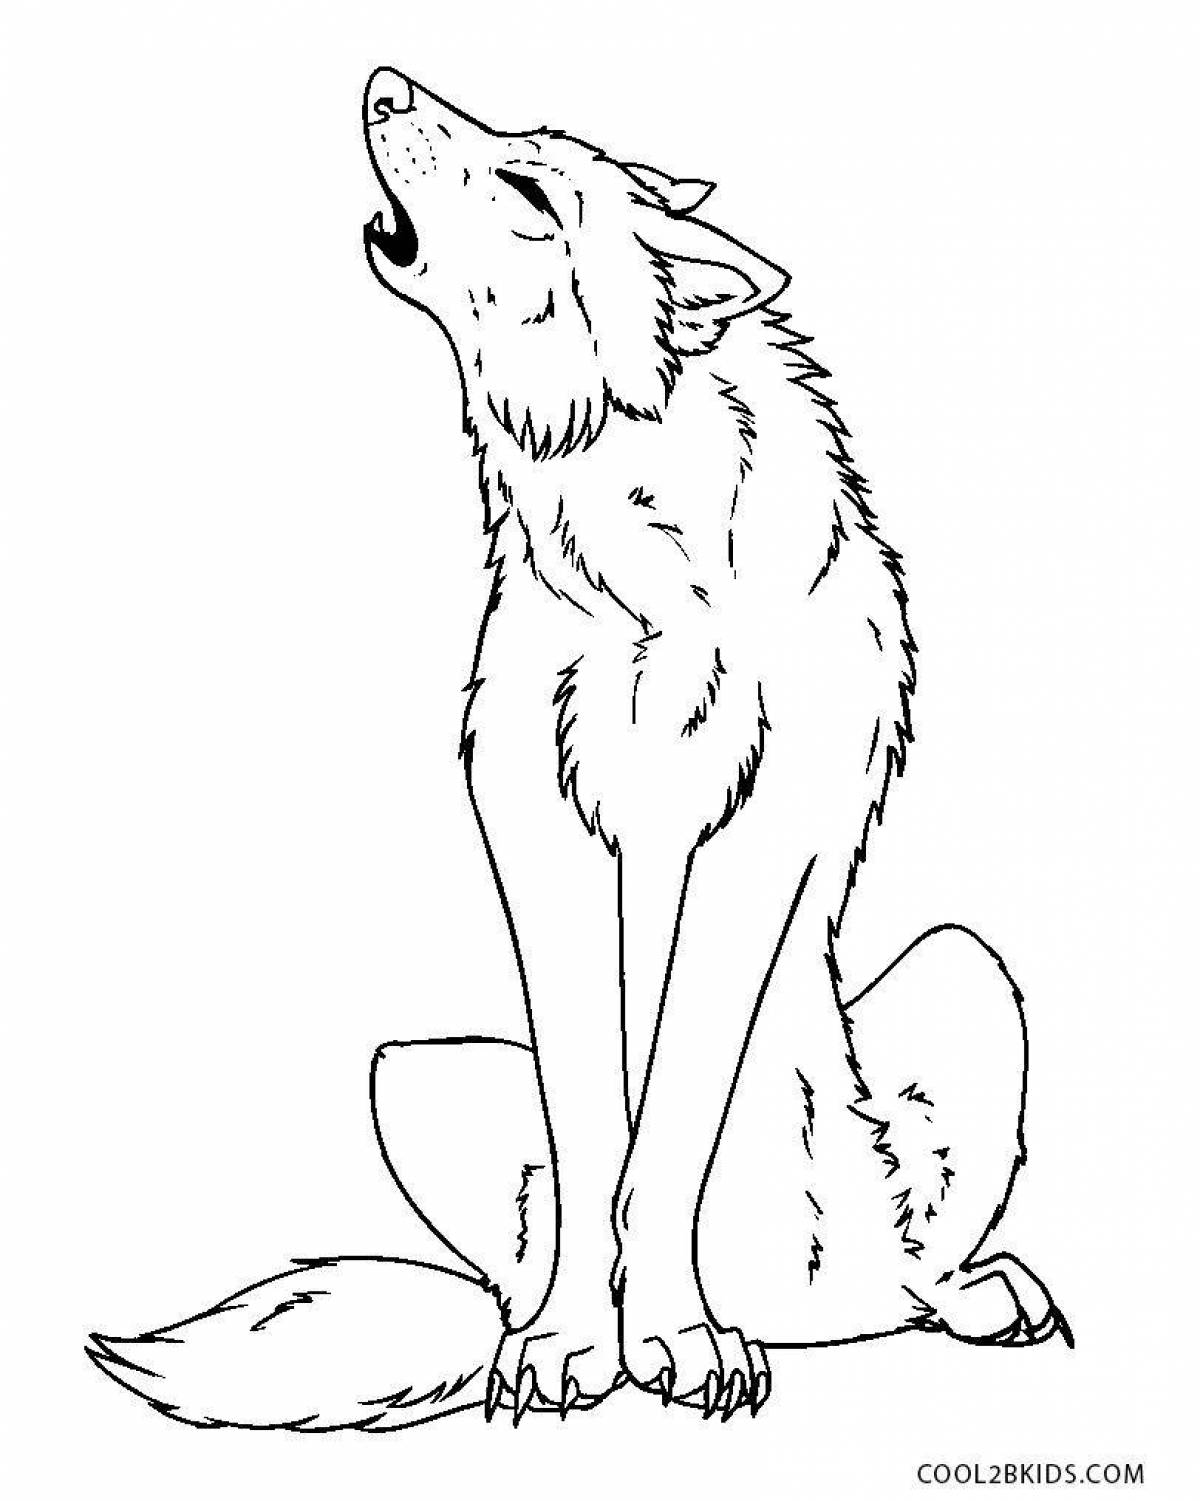 Dazzling wolf coloring book for kids 6-7 years old